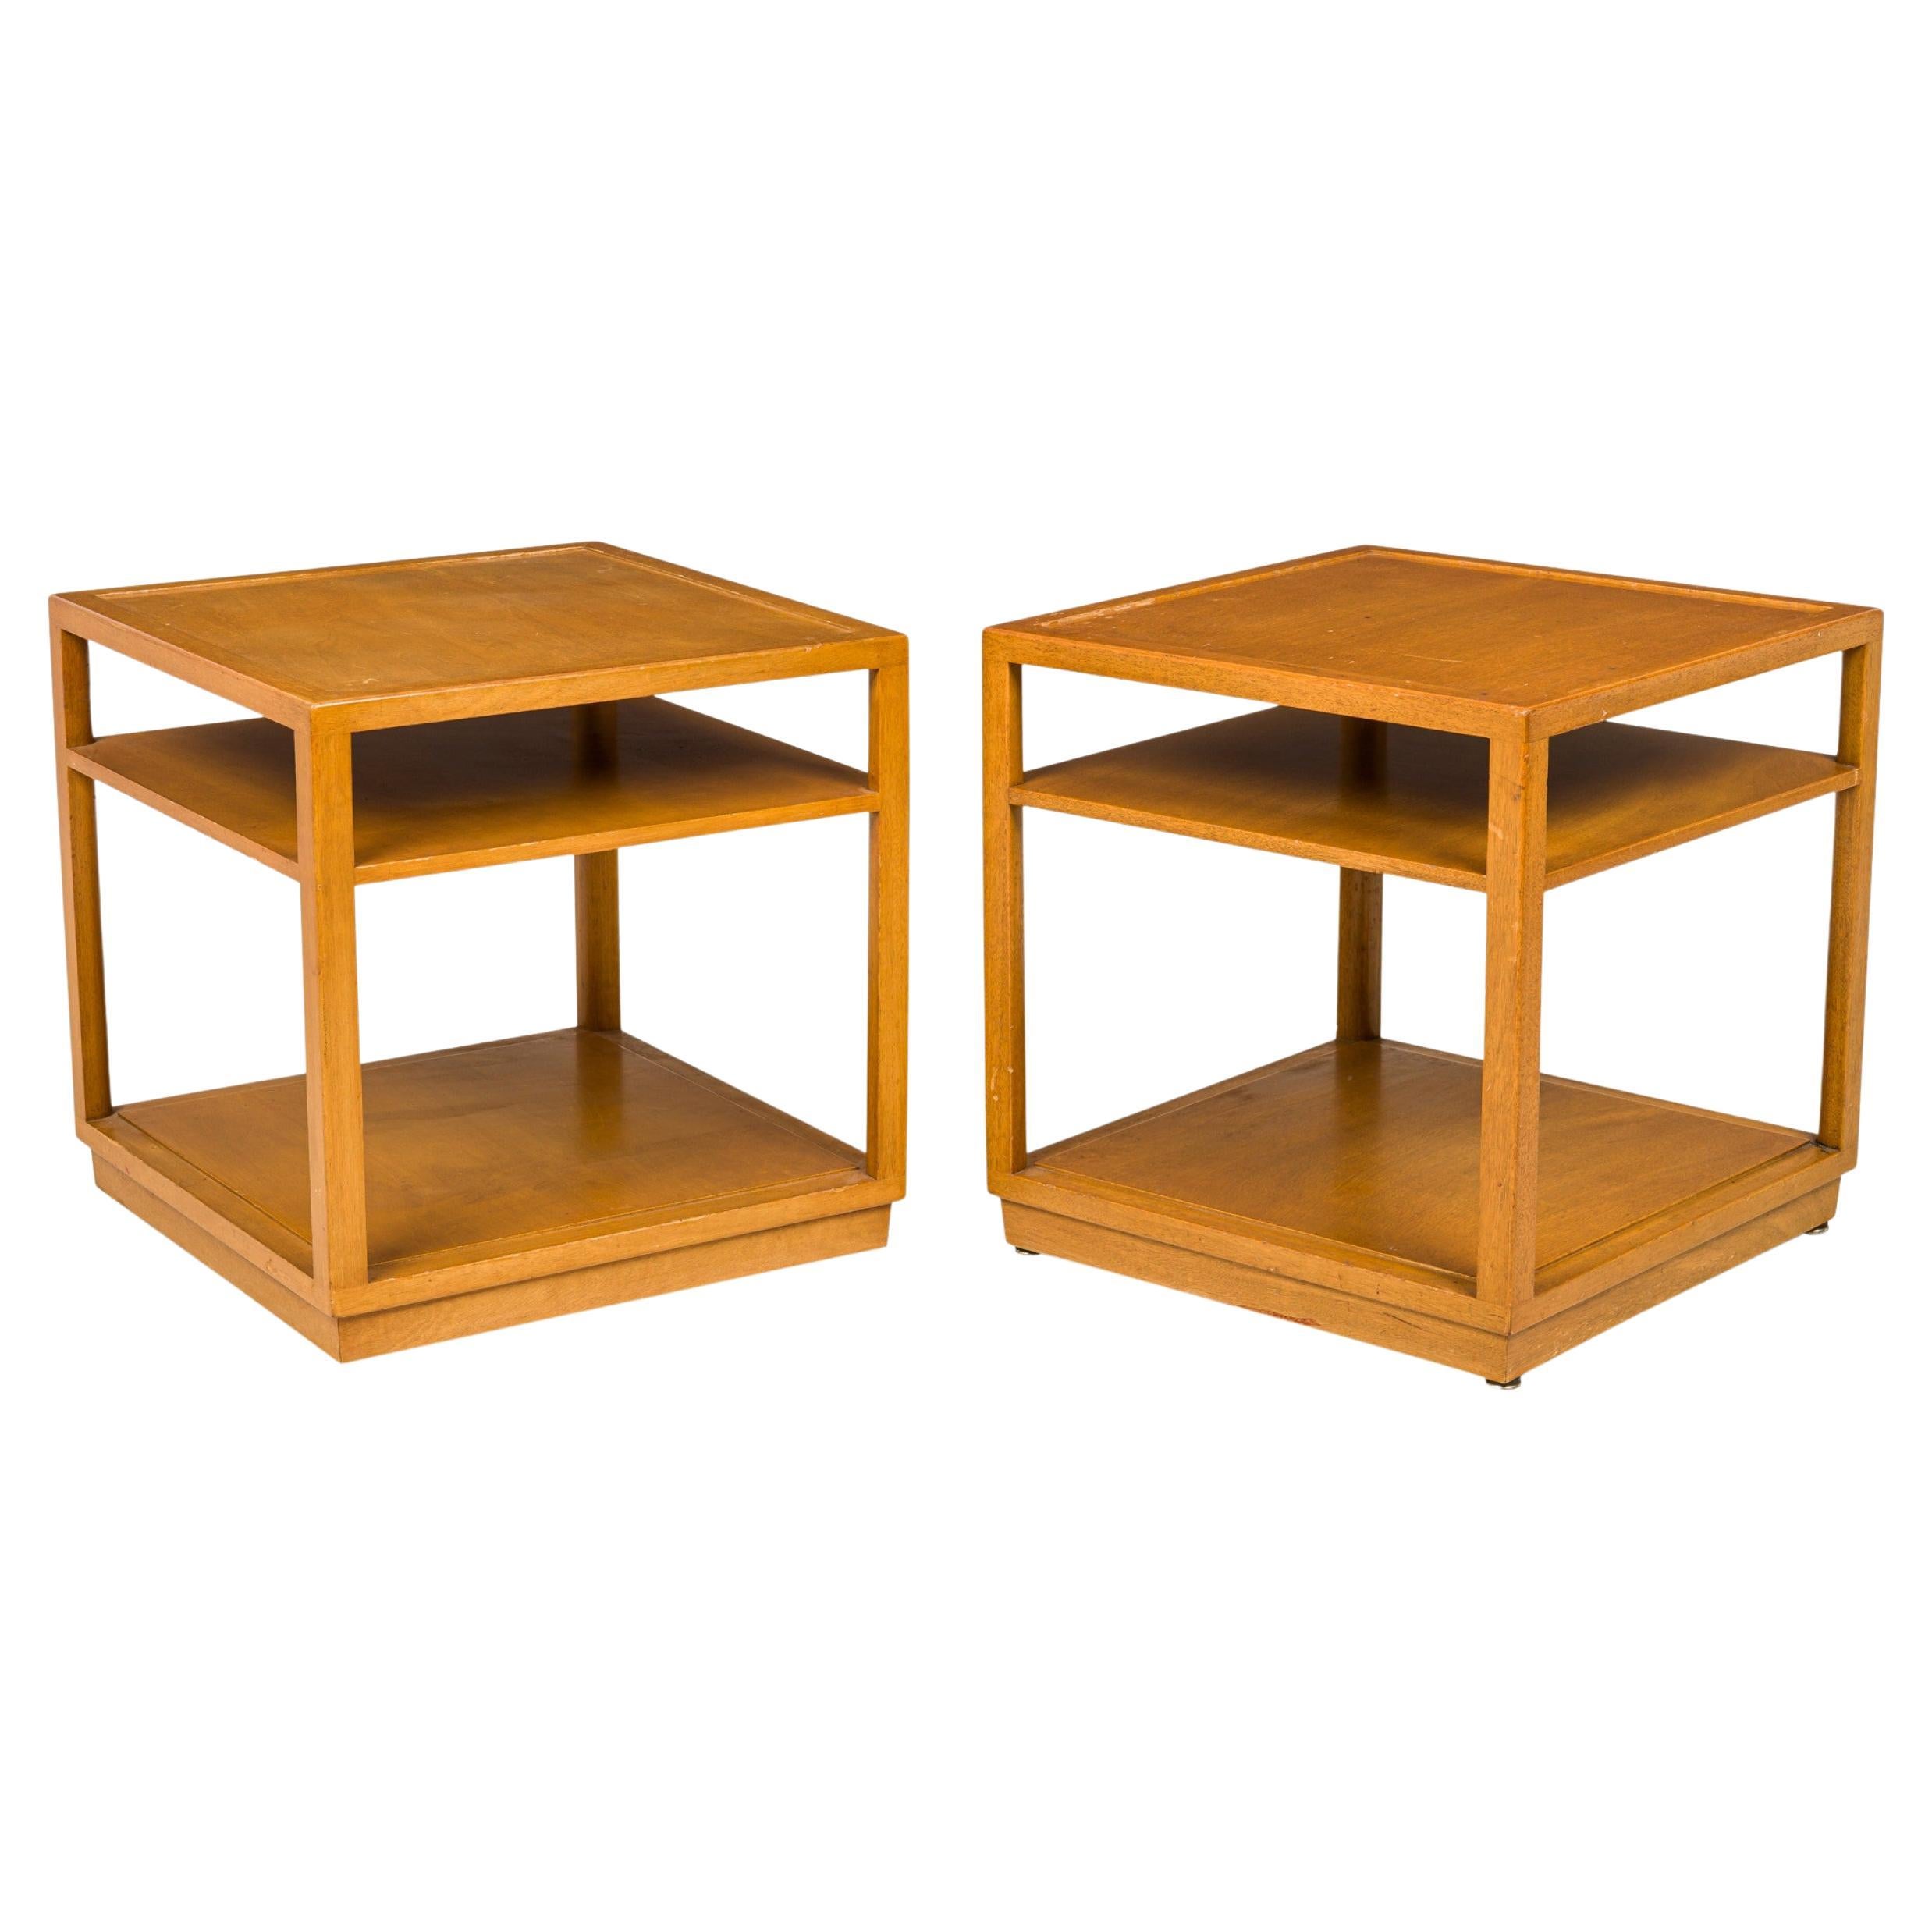 Pair of Edward Wormley for Dunbar Square Wooden Double Shelf End / Side Table For Sale